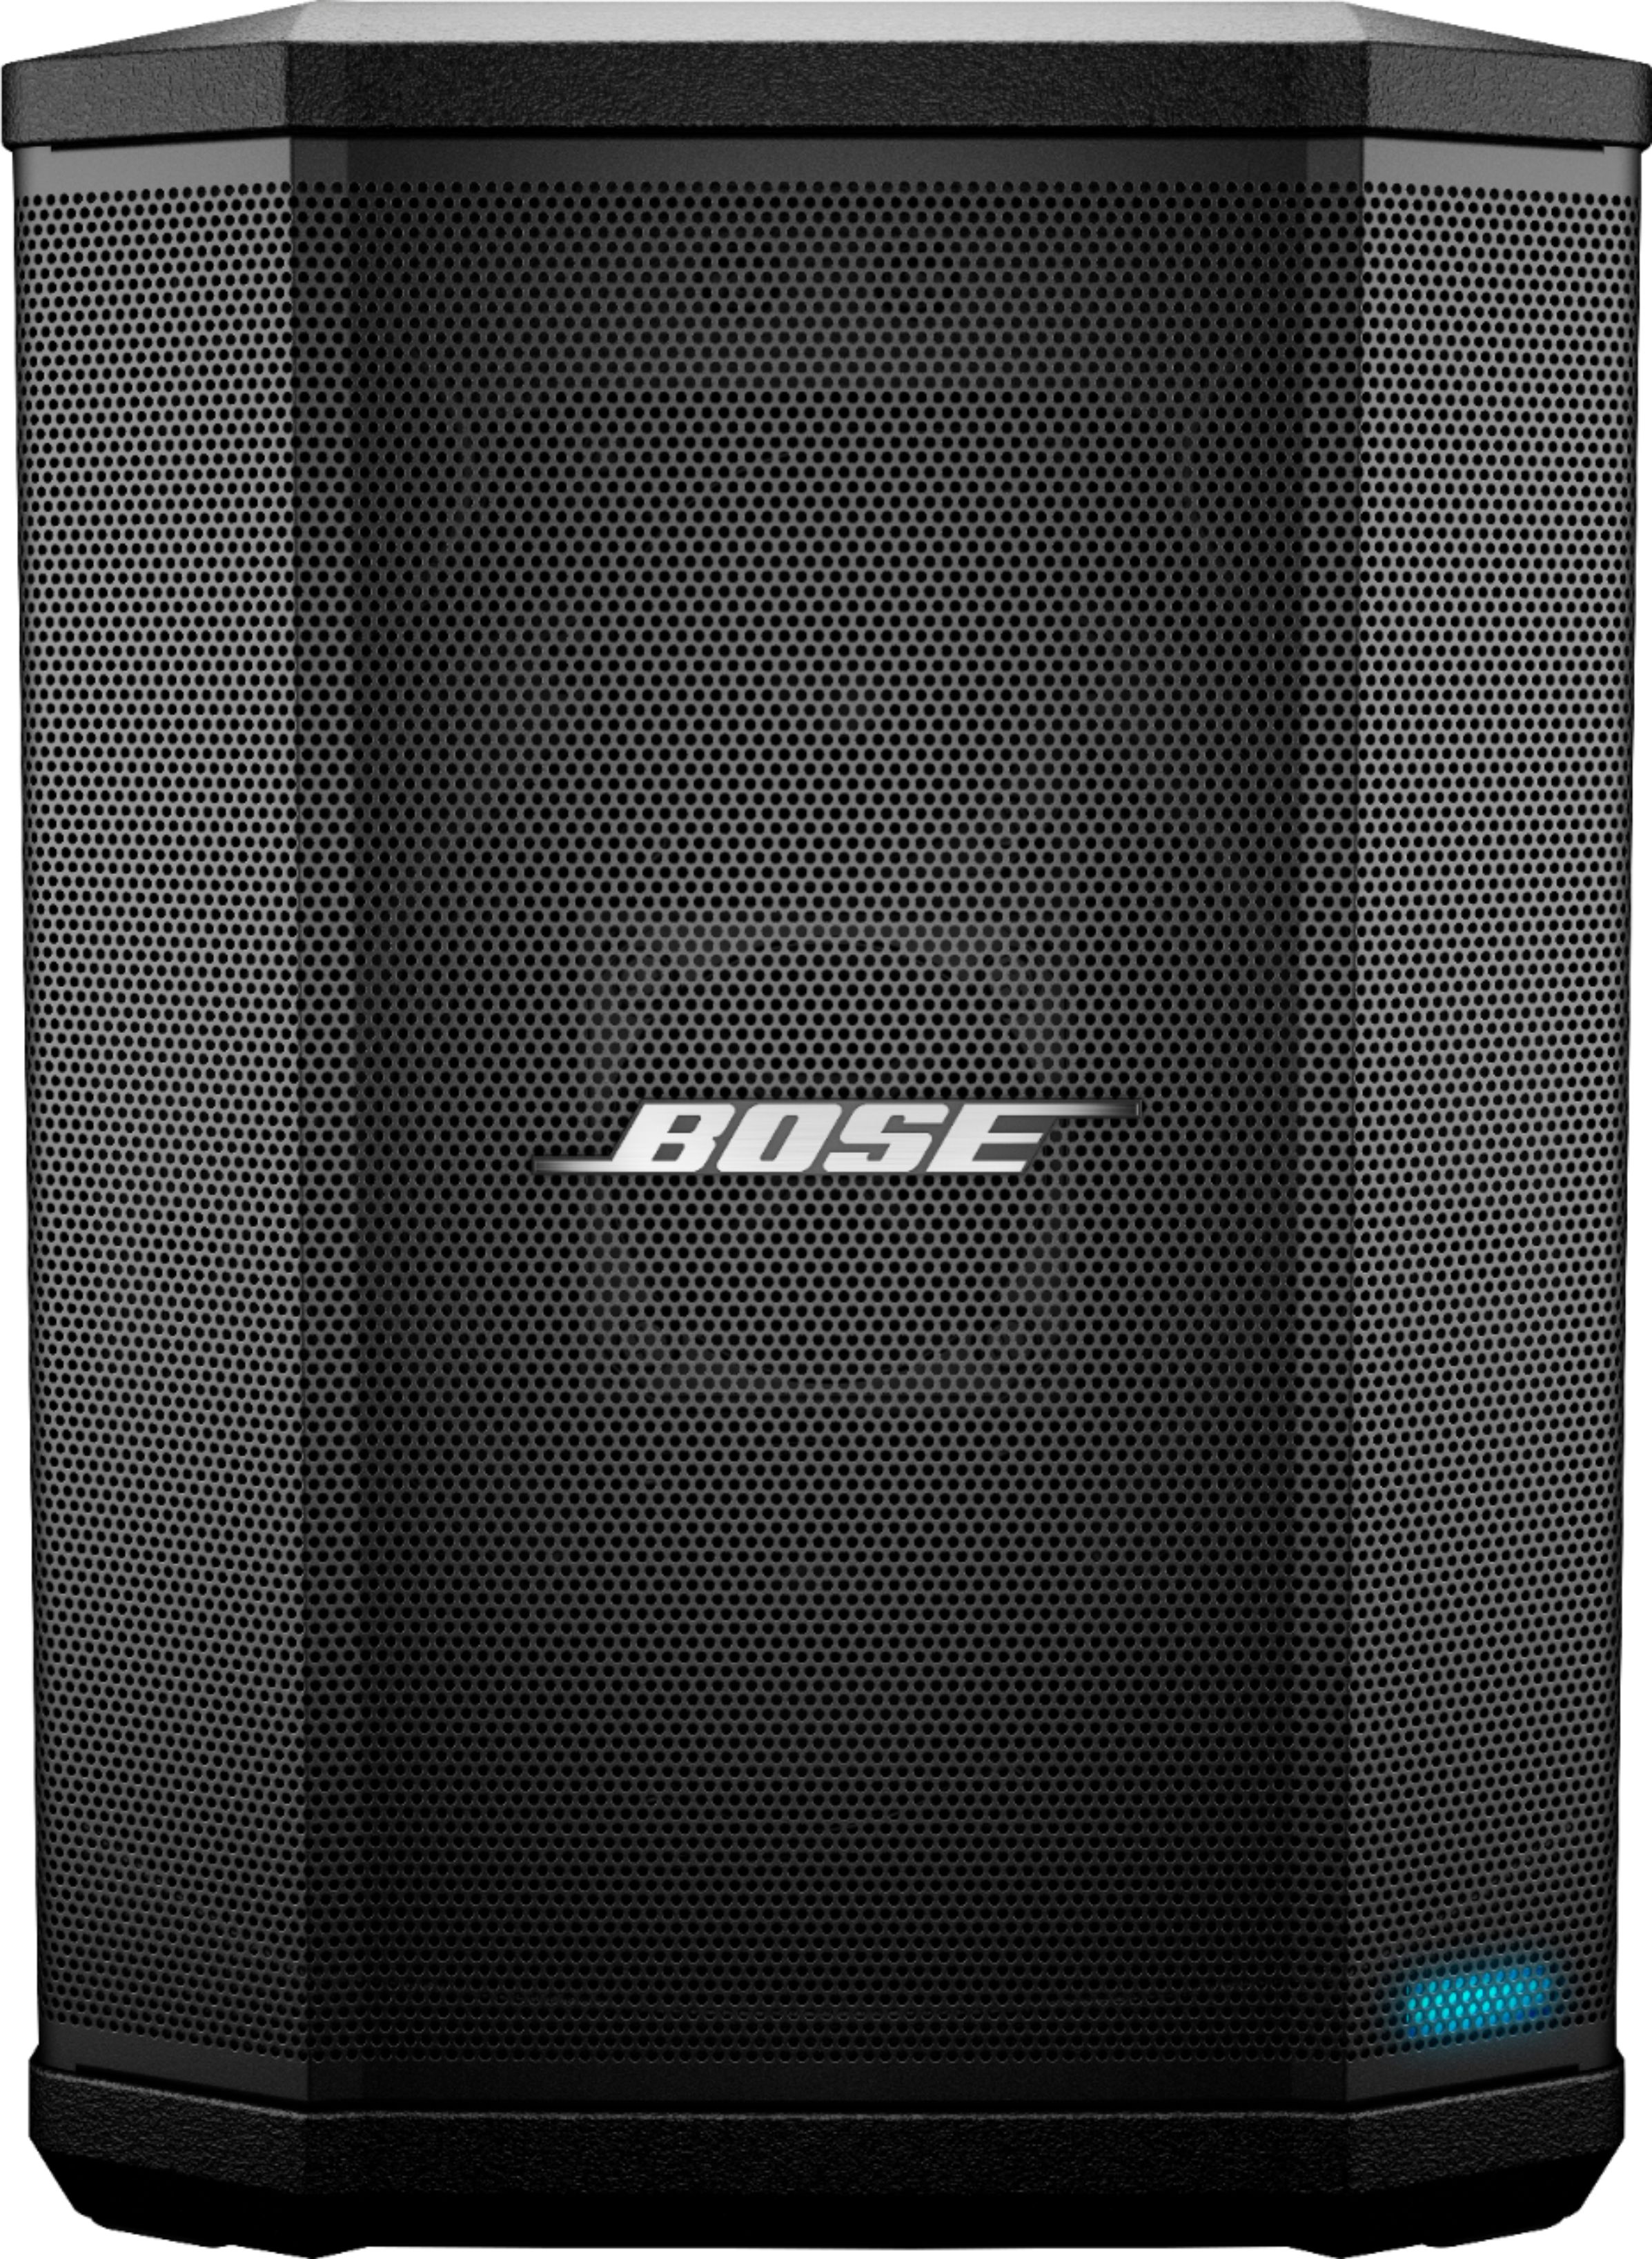 How to Turn On Your Bose Speaker? 15